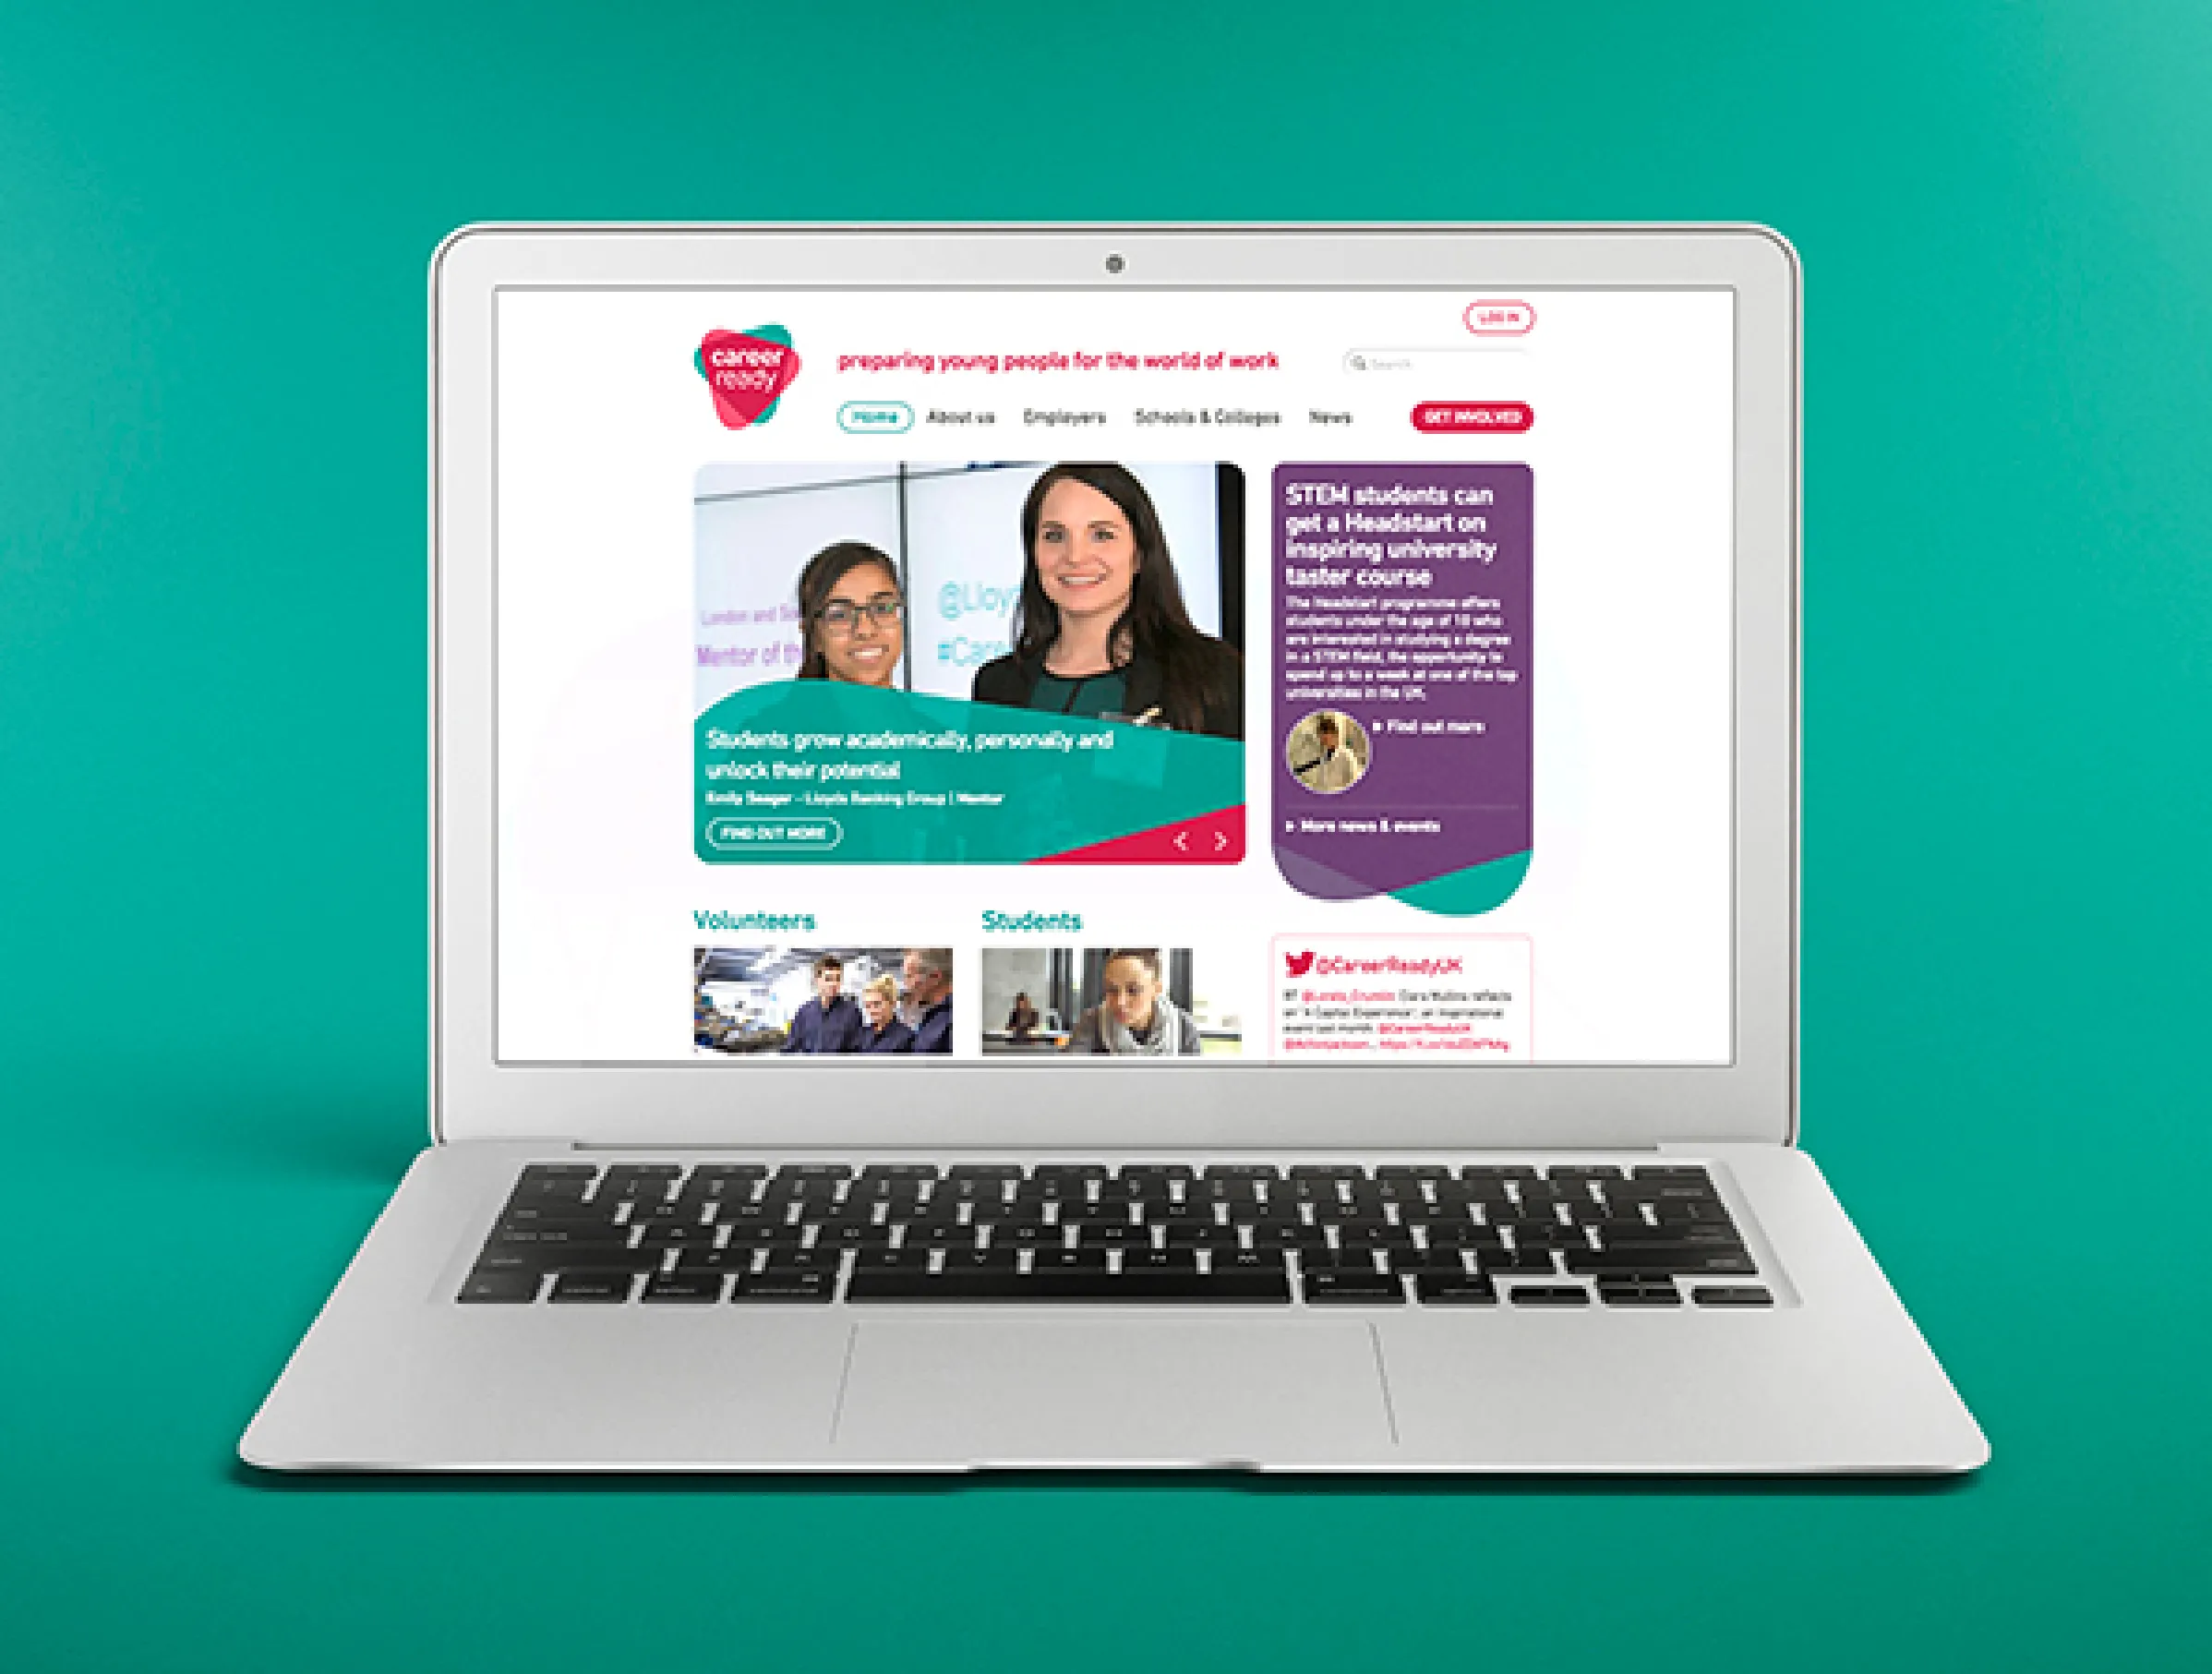 Career Ready rebrand shown on impact report, website and banner graphics